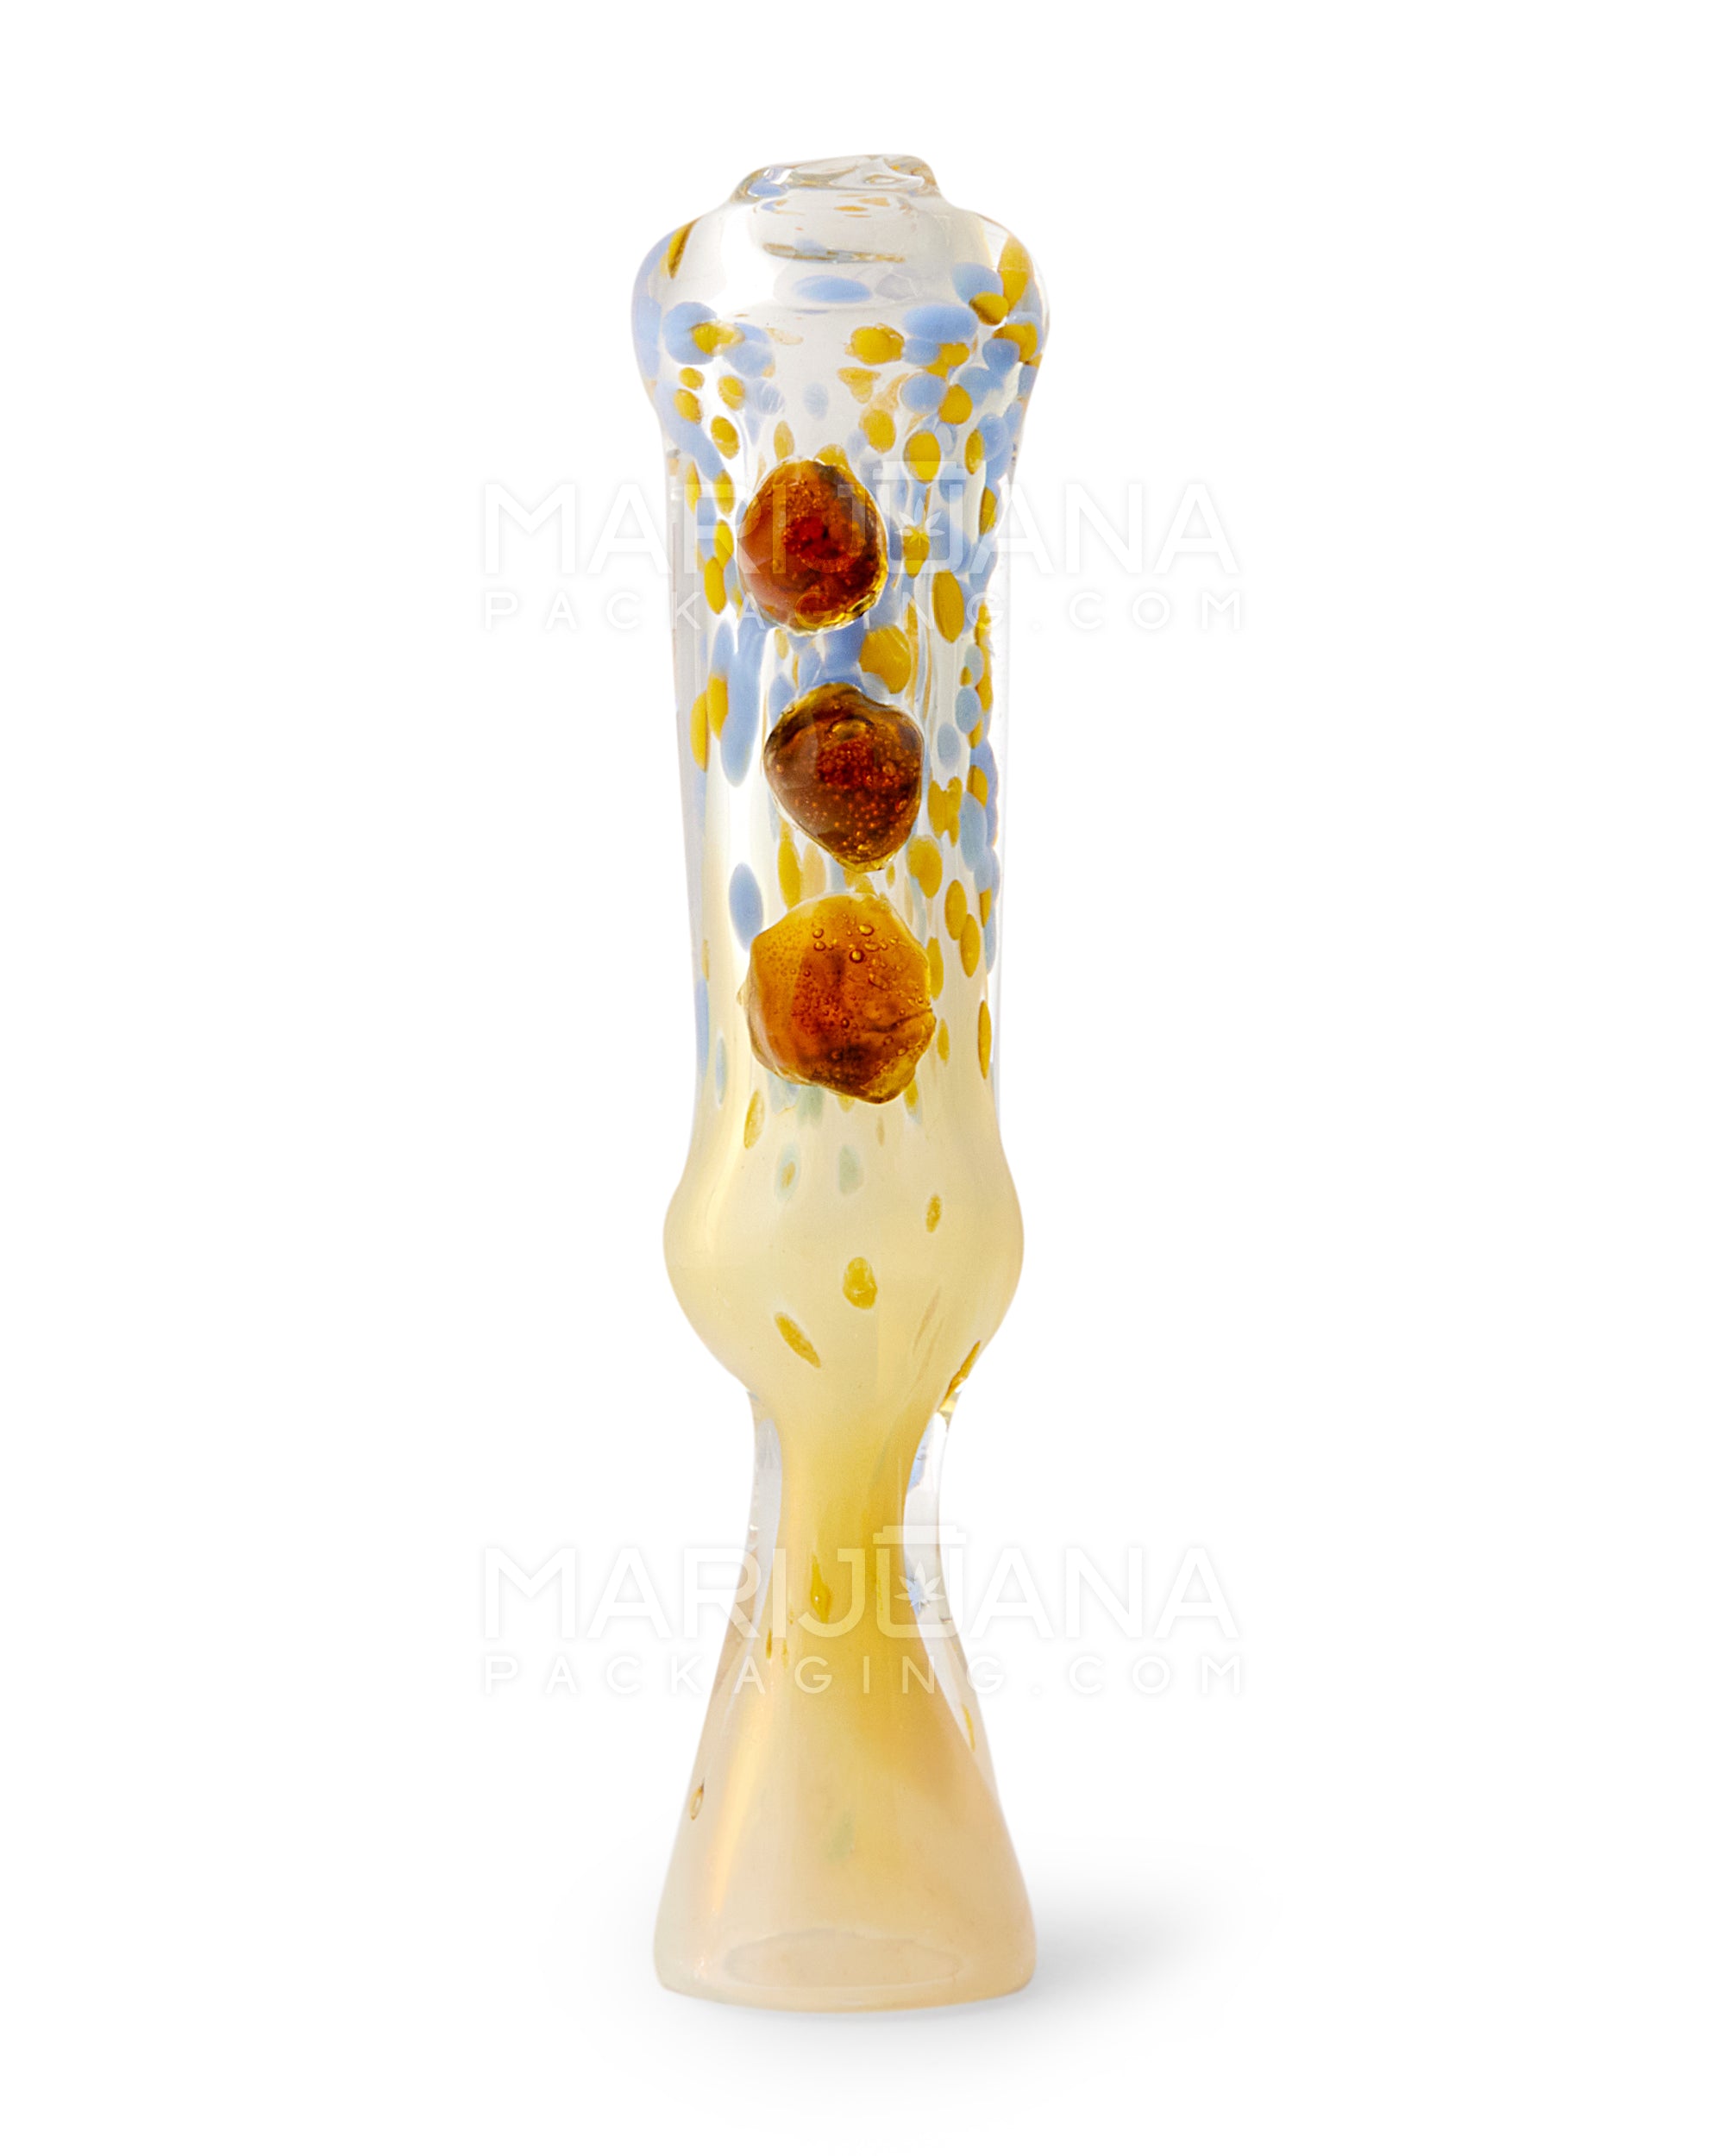 Glass Hash Pipe For Sale Online